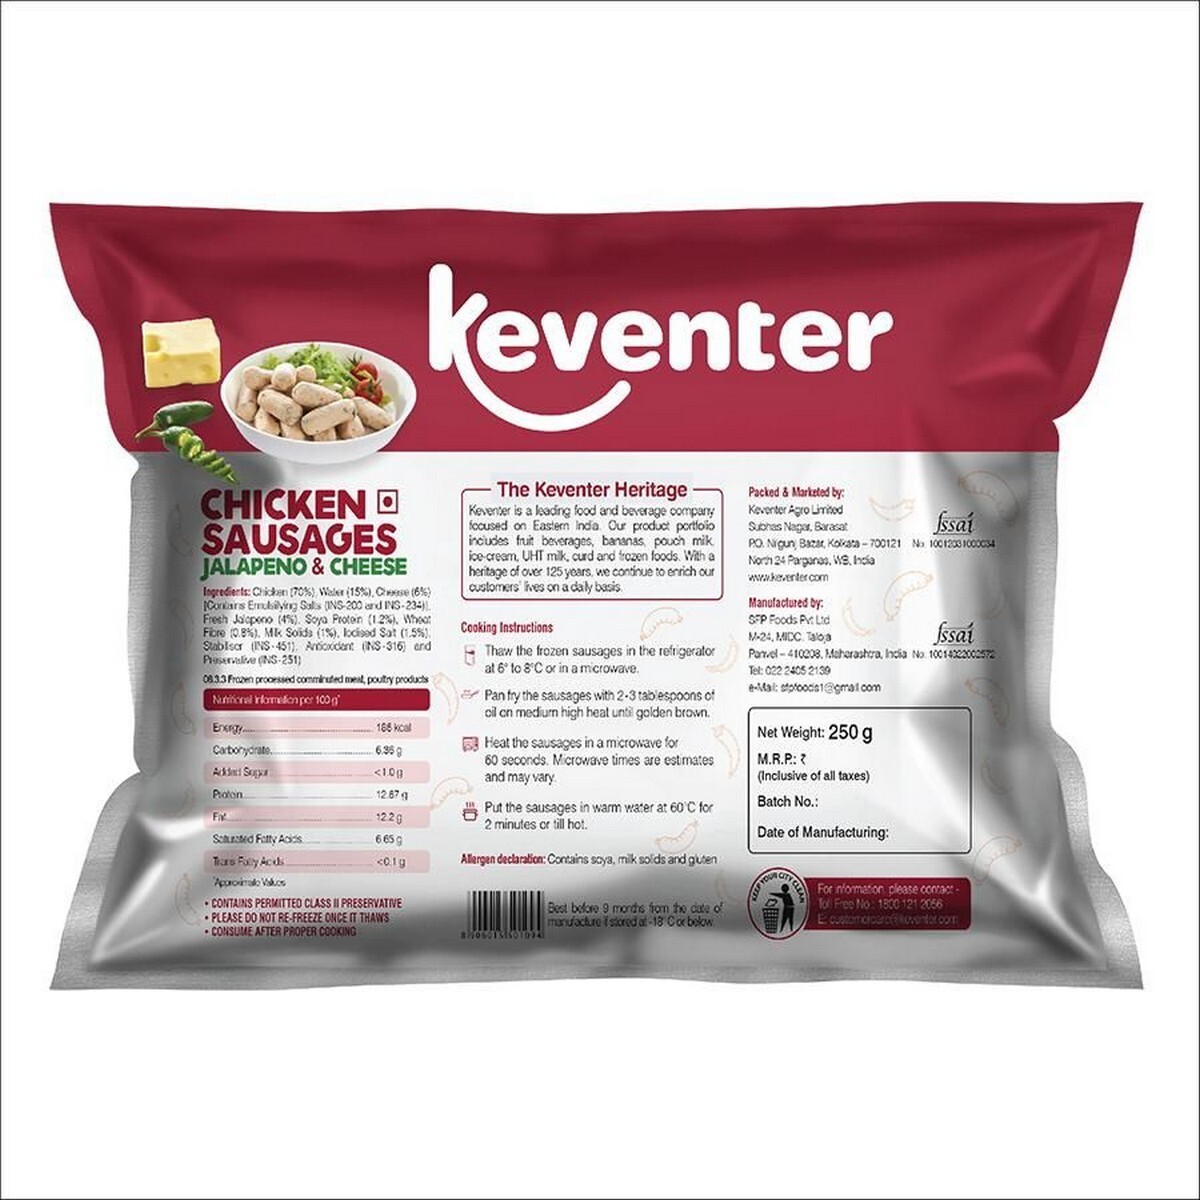 Keventer Chicken Sausages Jalapeno & Cheese 250g